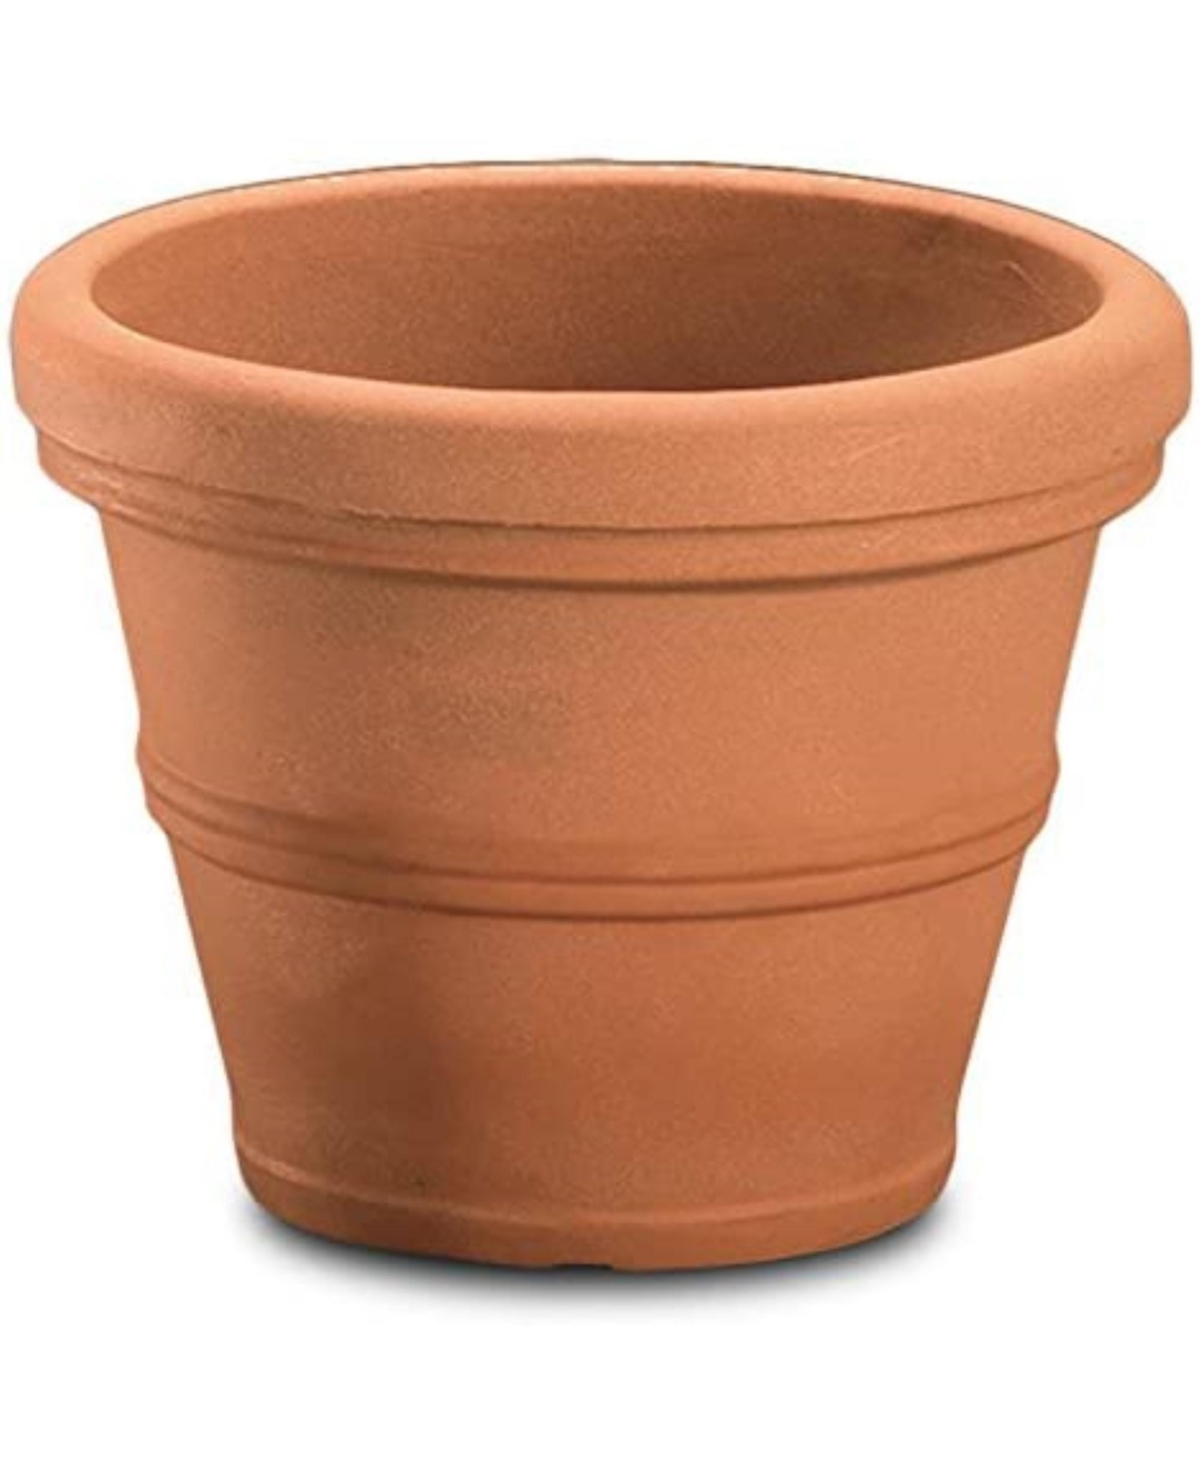 Brunello Classic Planter 16 Inch Weathered Terracotta - Red